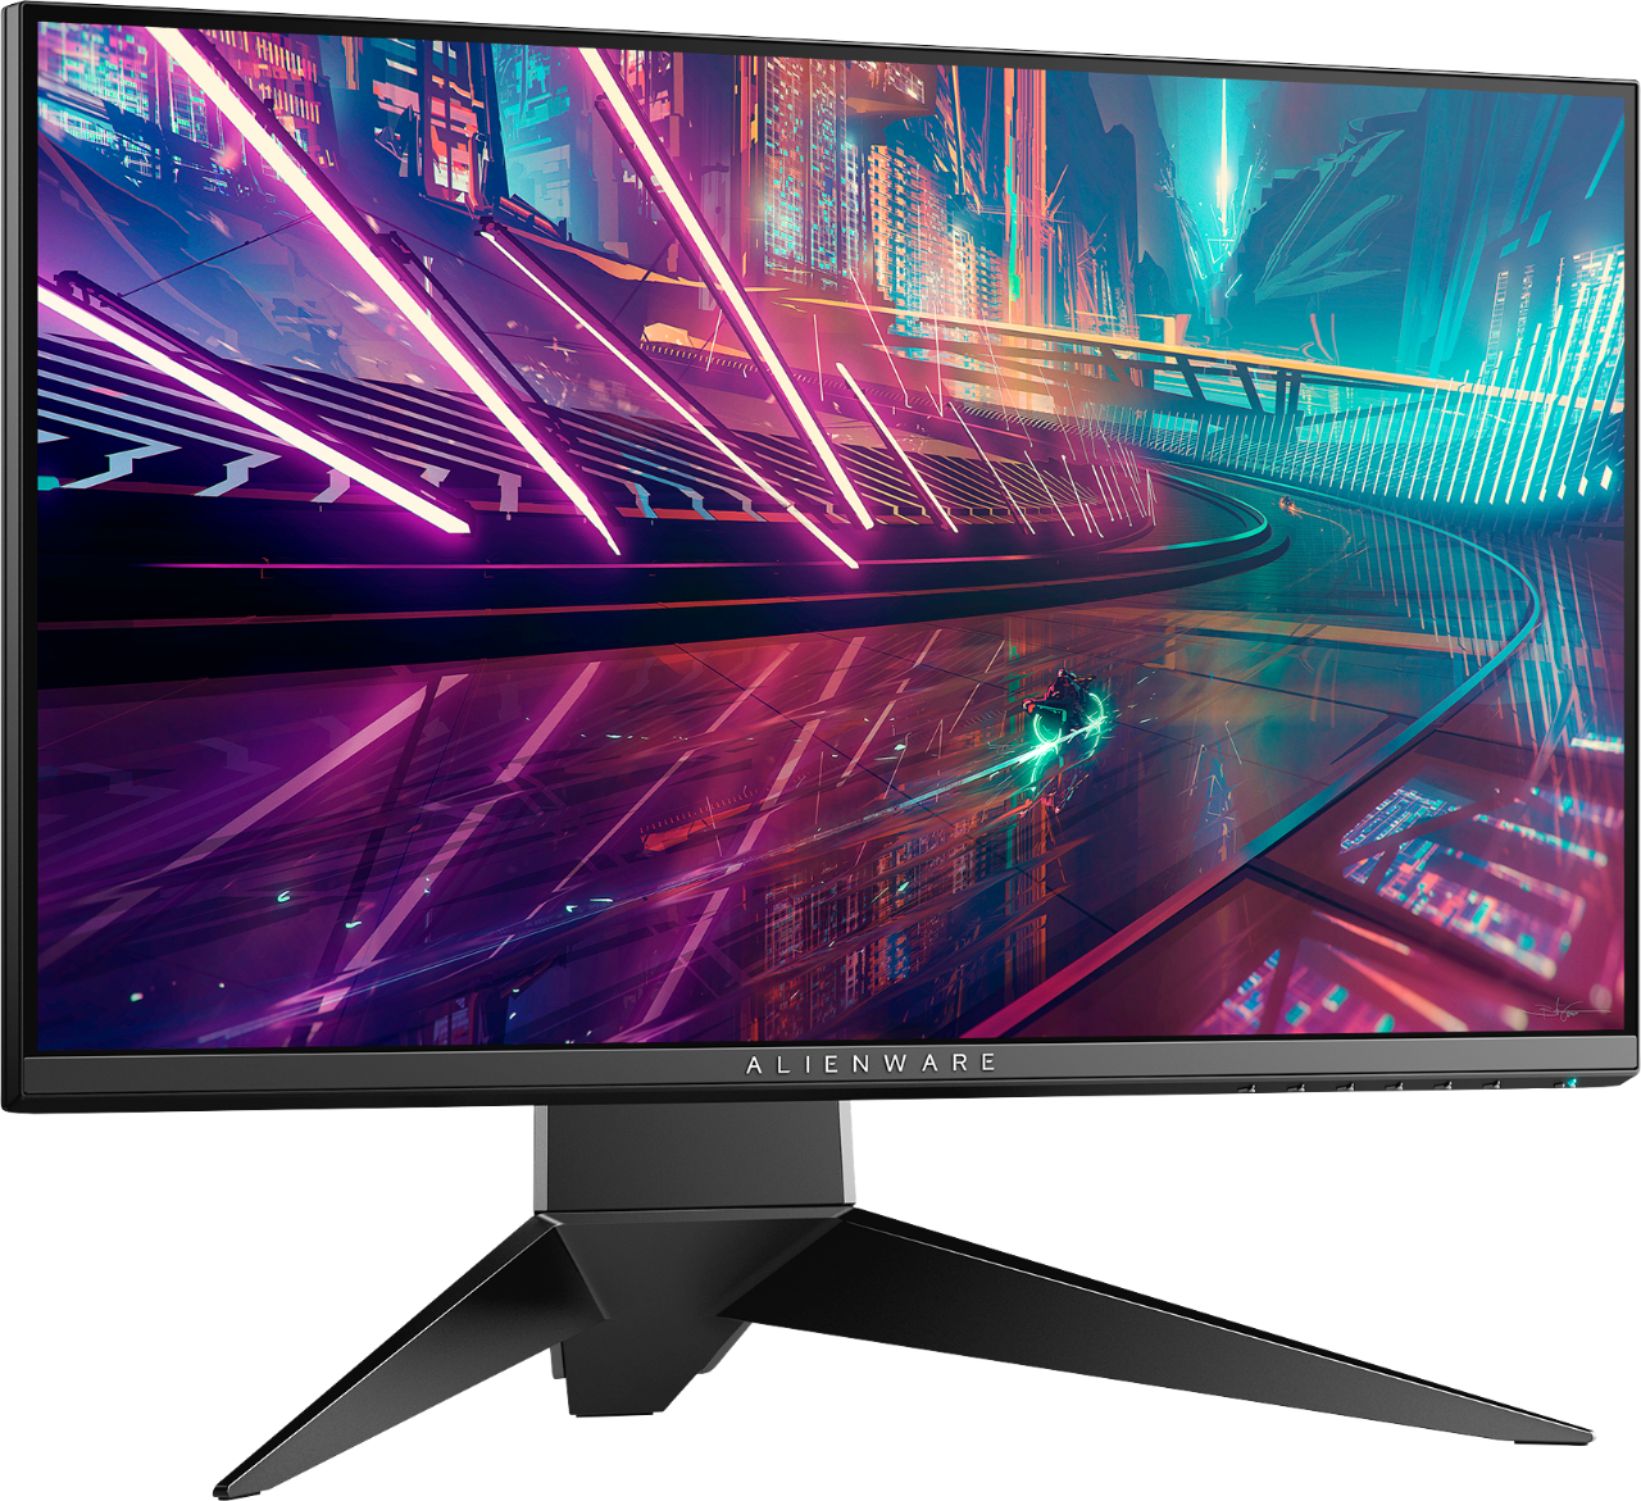 Angle View: Alienware - Geek Squad Certified Refurbished 25" LED FHD FreeSync Monitor - Black